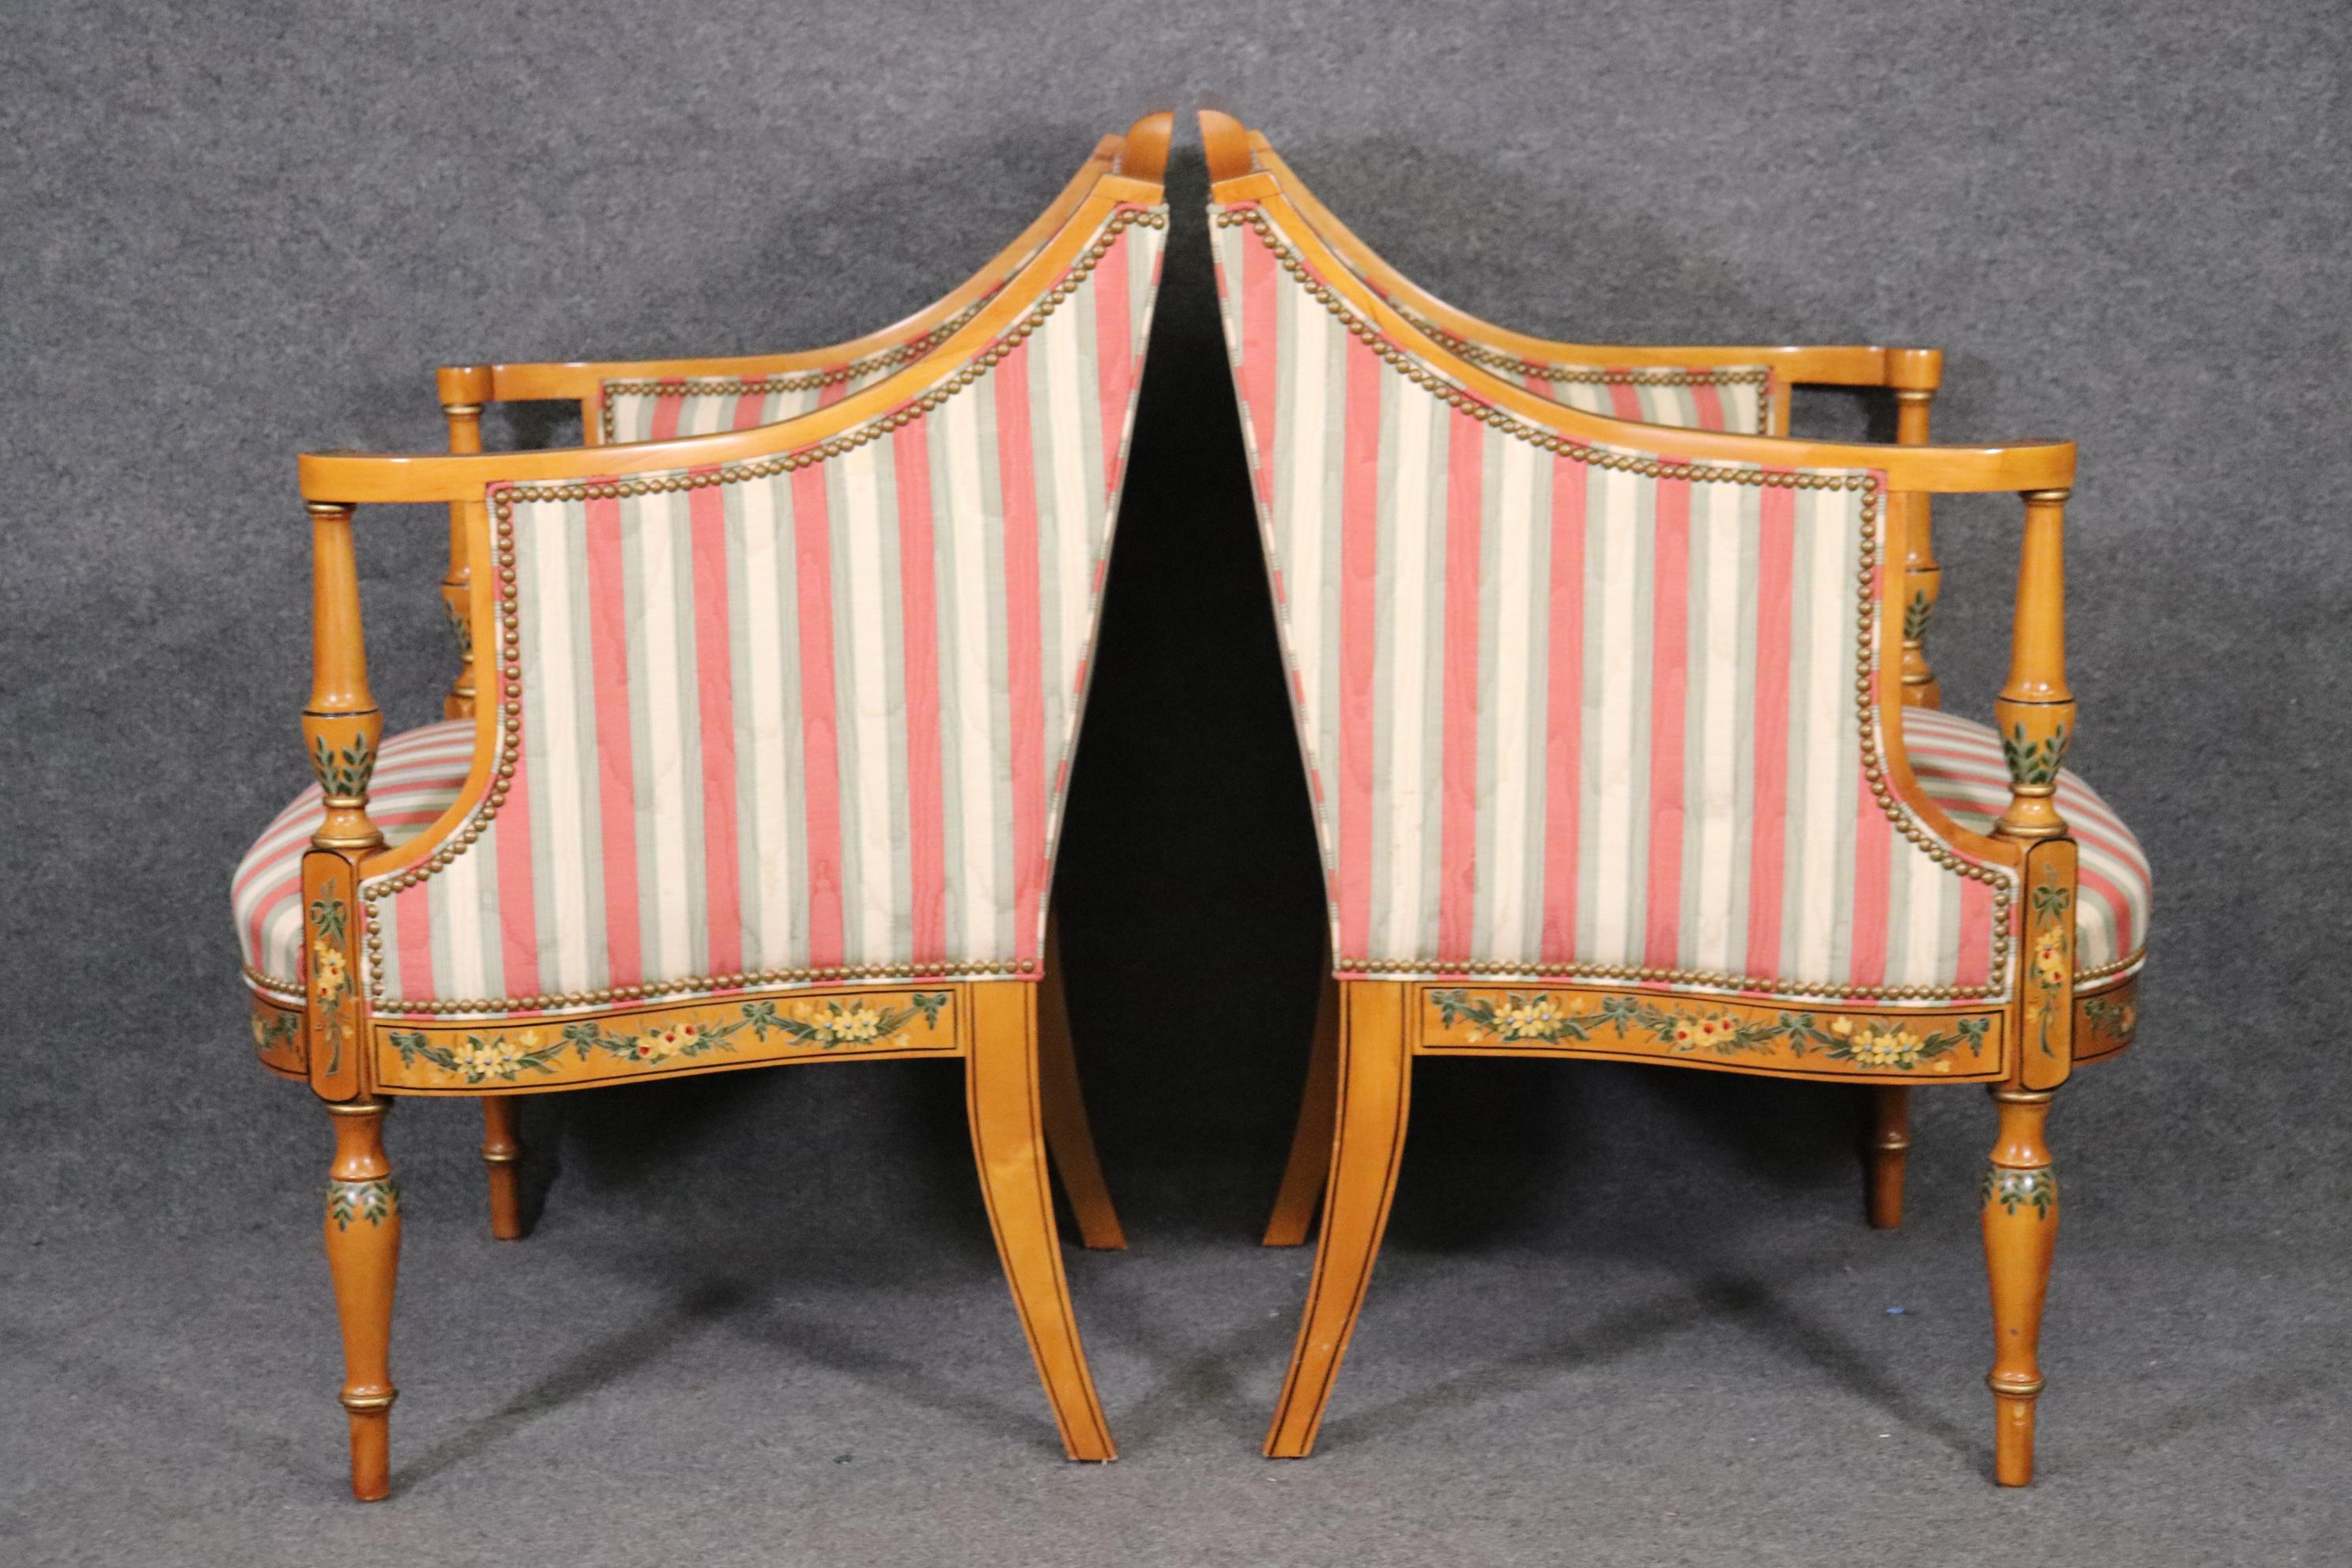 English Fine Hand-Painted Pair of Adams Style Satinwood Bergere Chairs